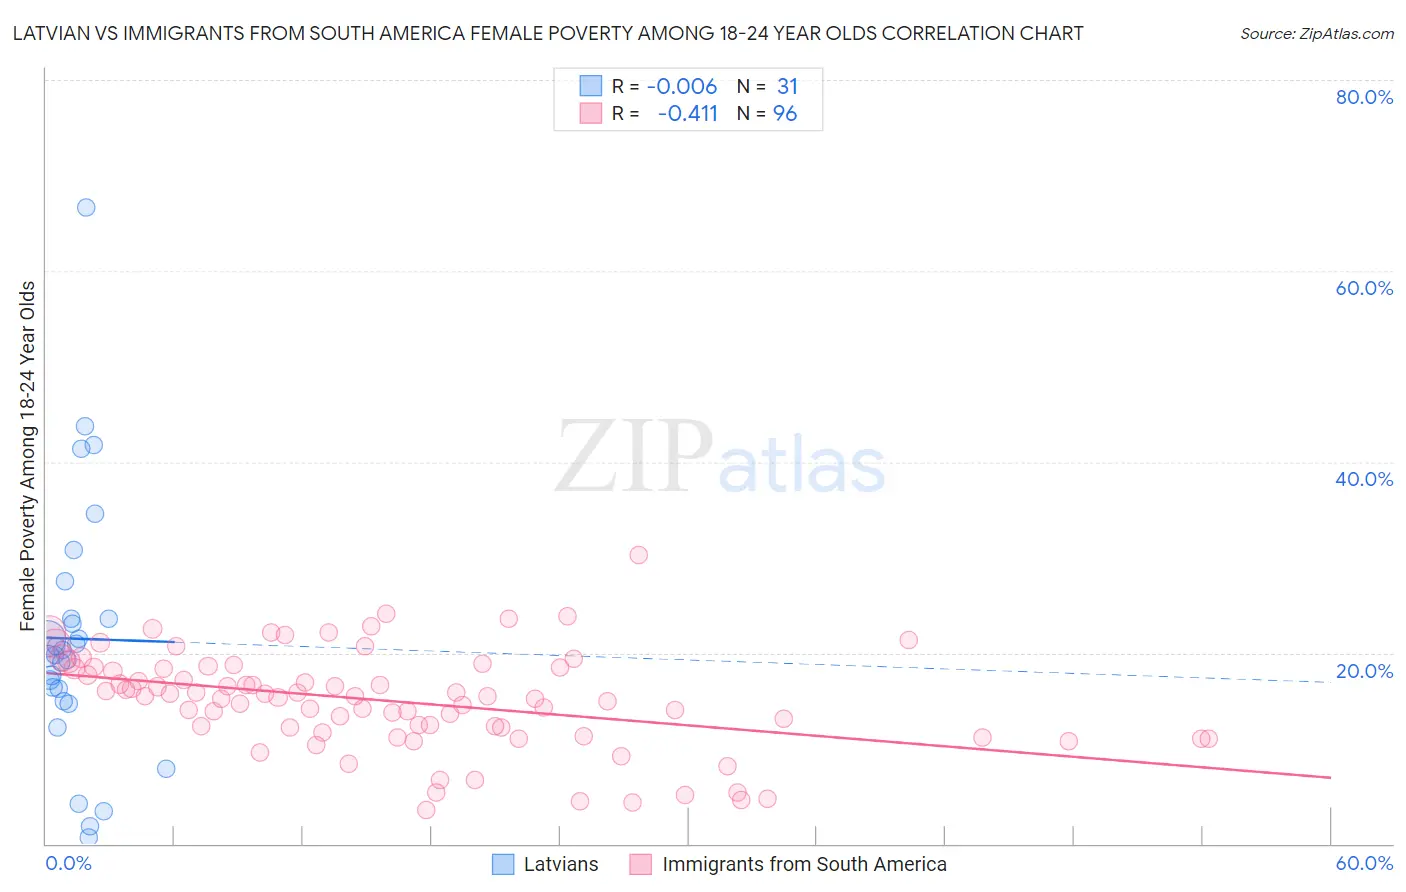 Latvian vs Immigrants from South America Female Poverty Among 18-24 Year Olds